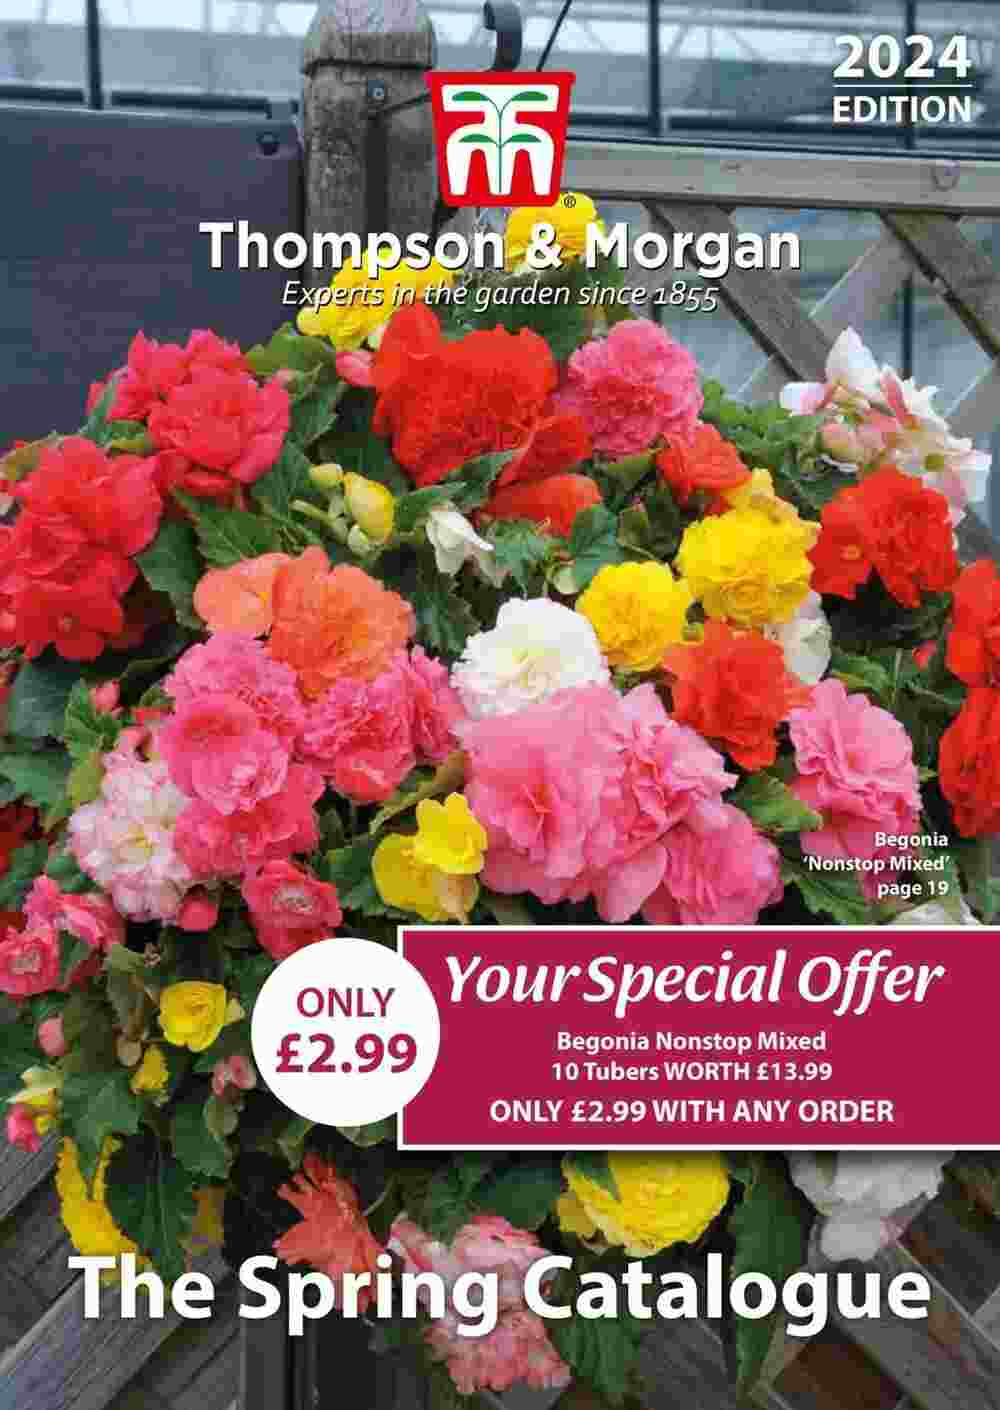 Thompson & Morgan offers valid from 01/03/2024 - Page 1.